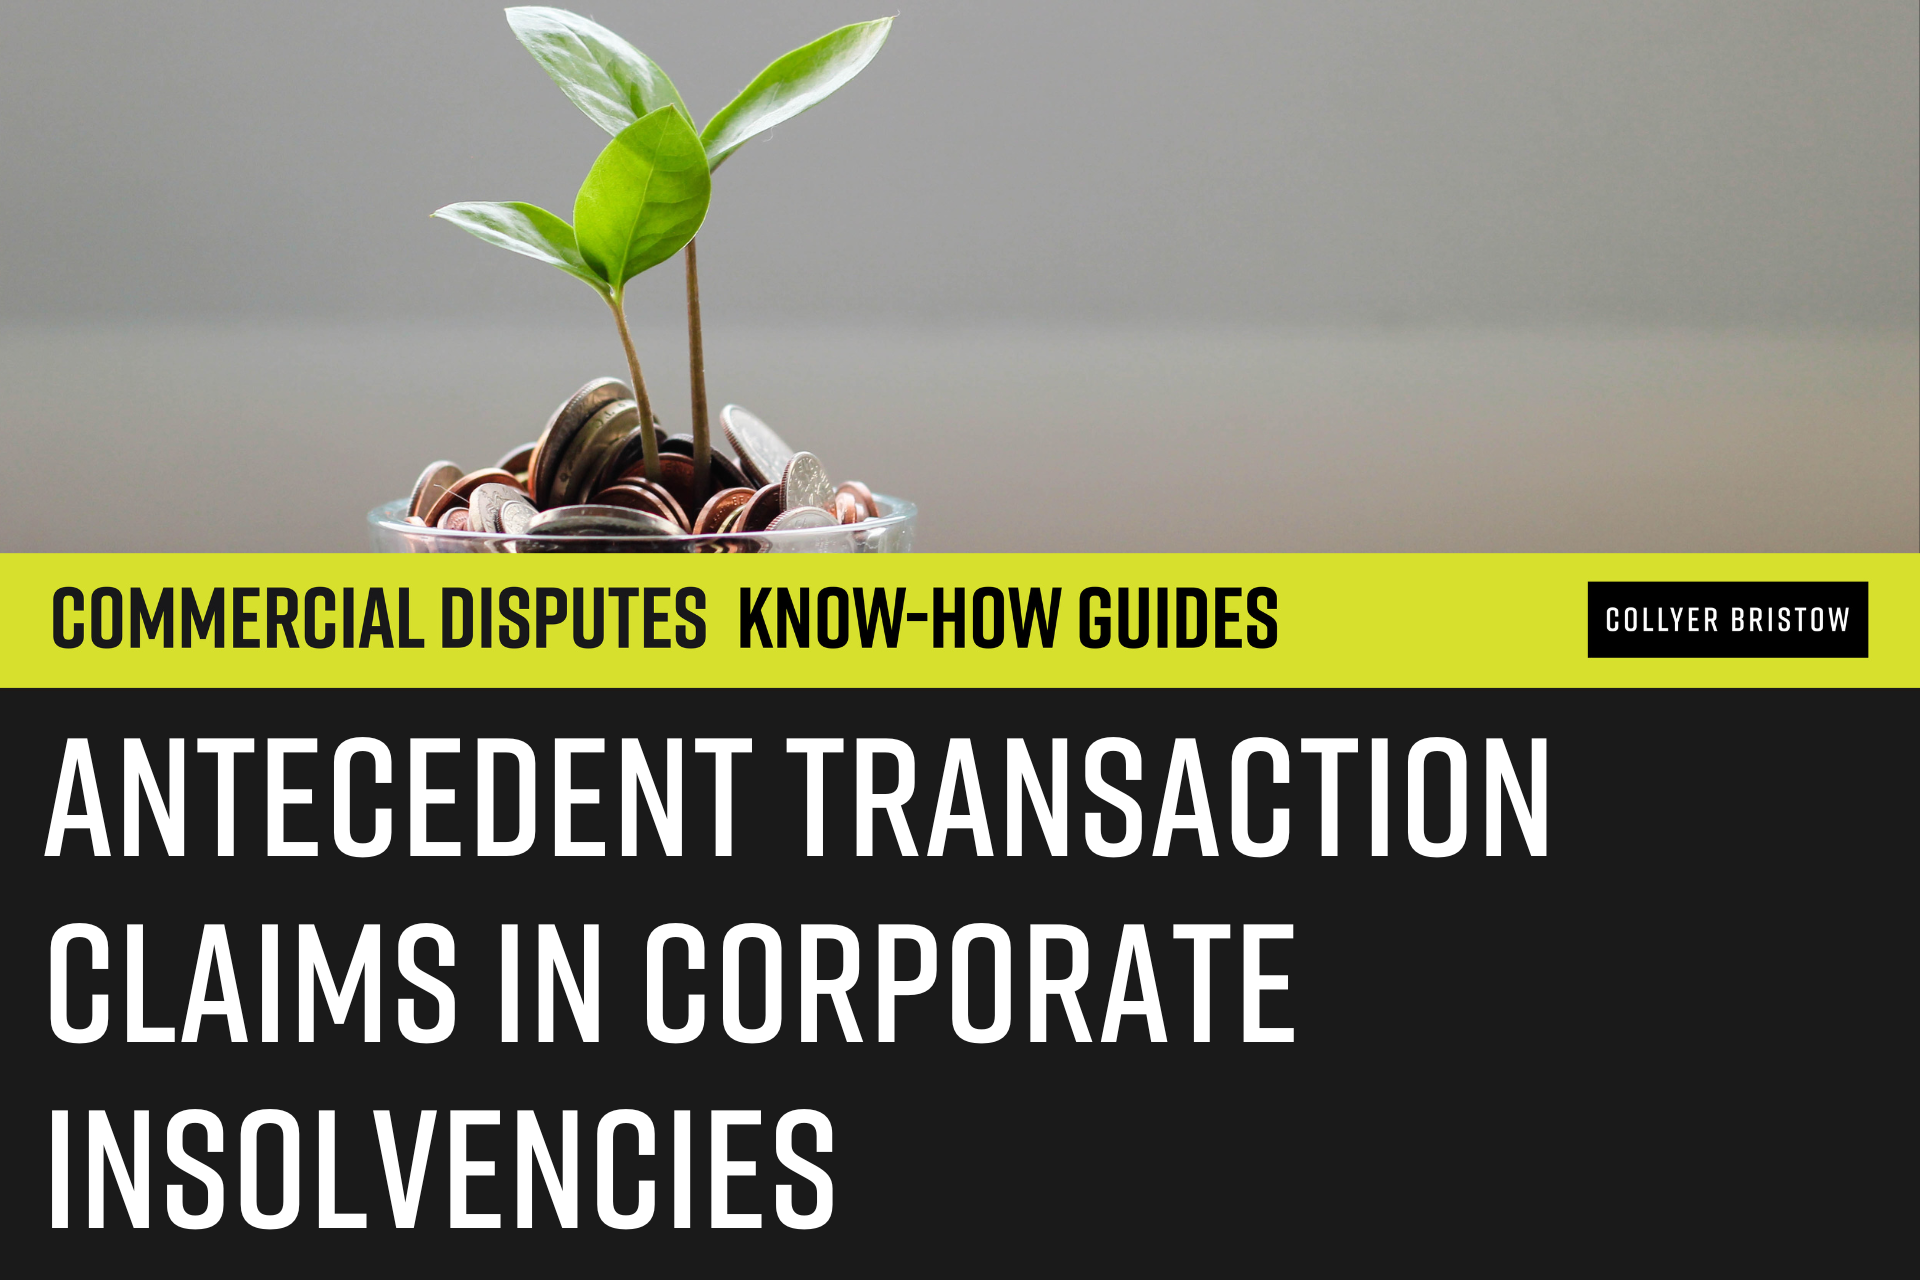 Antecedent transaction claims in insolvencies